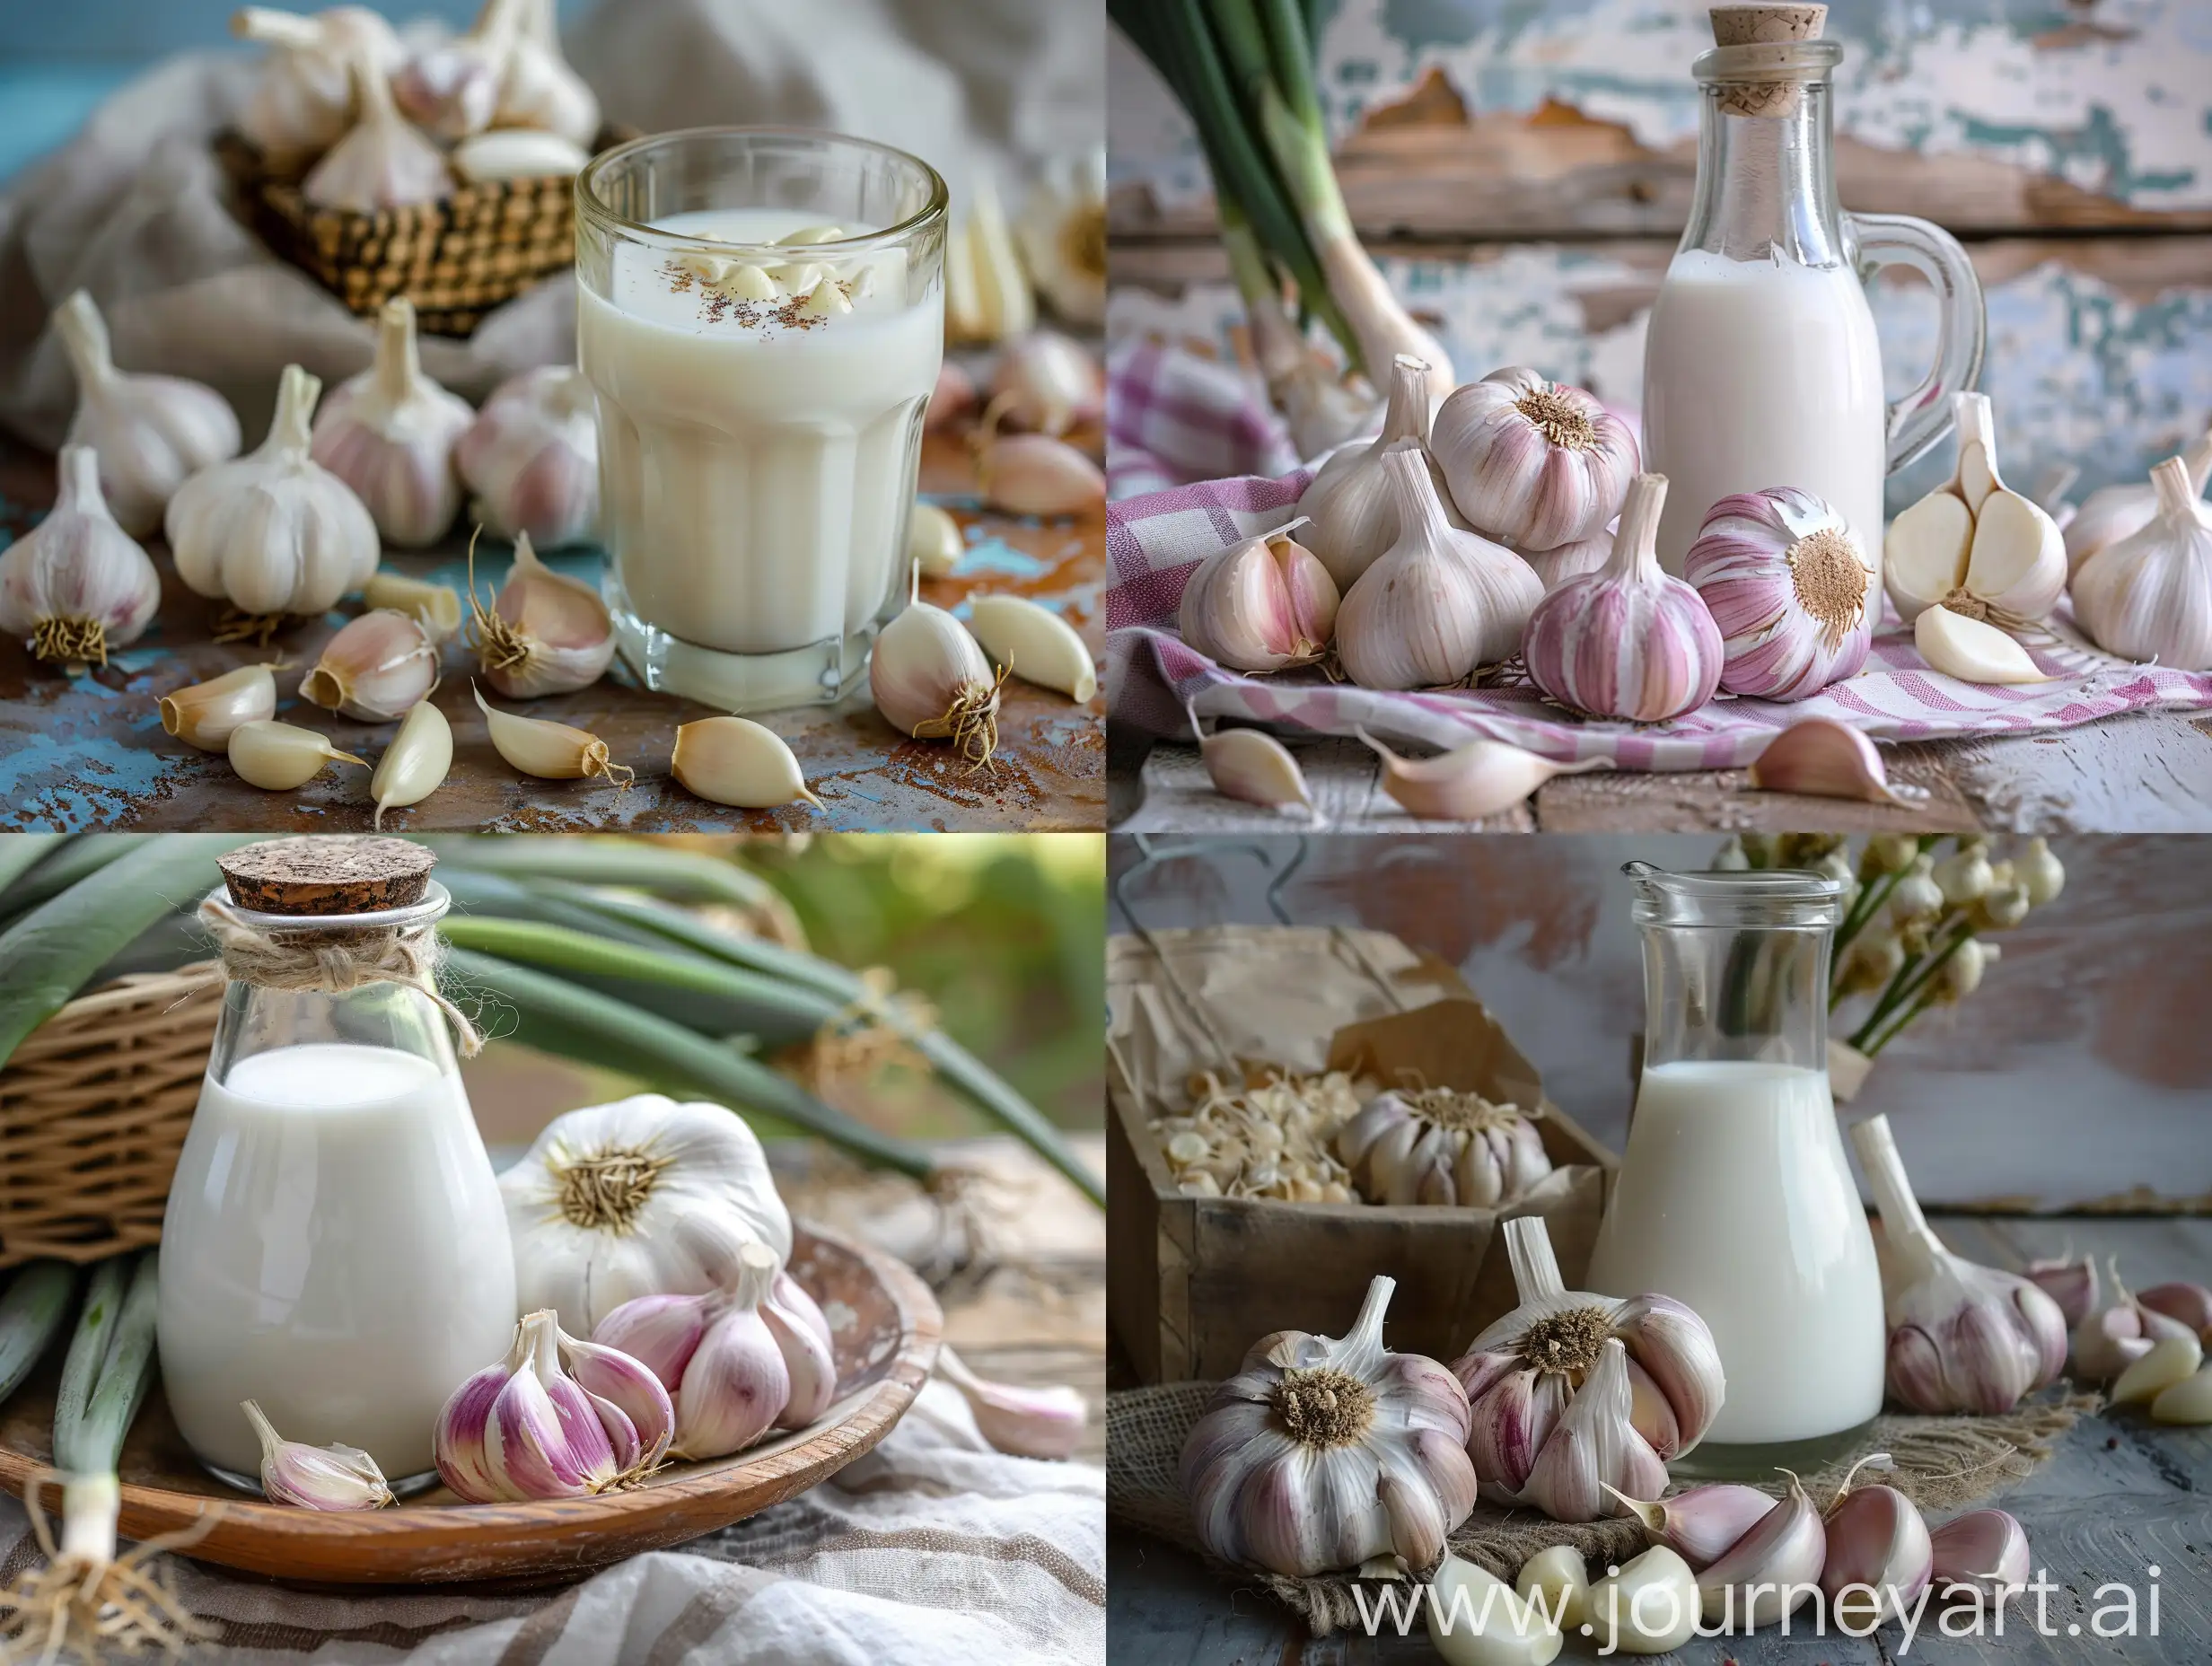 Attractive advertising photo of garlic with milk with an attractive background